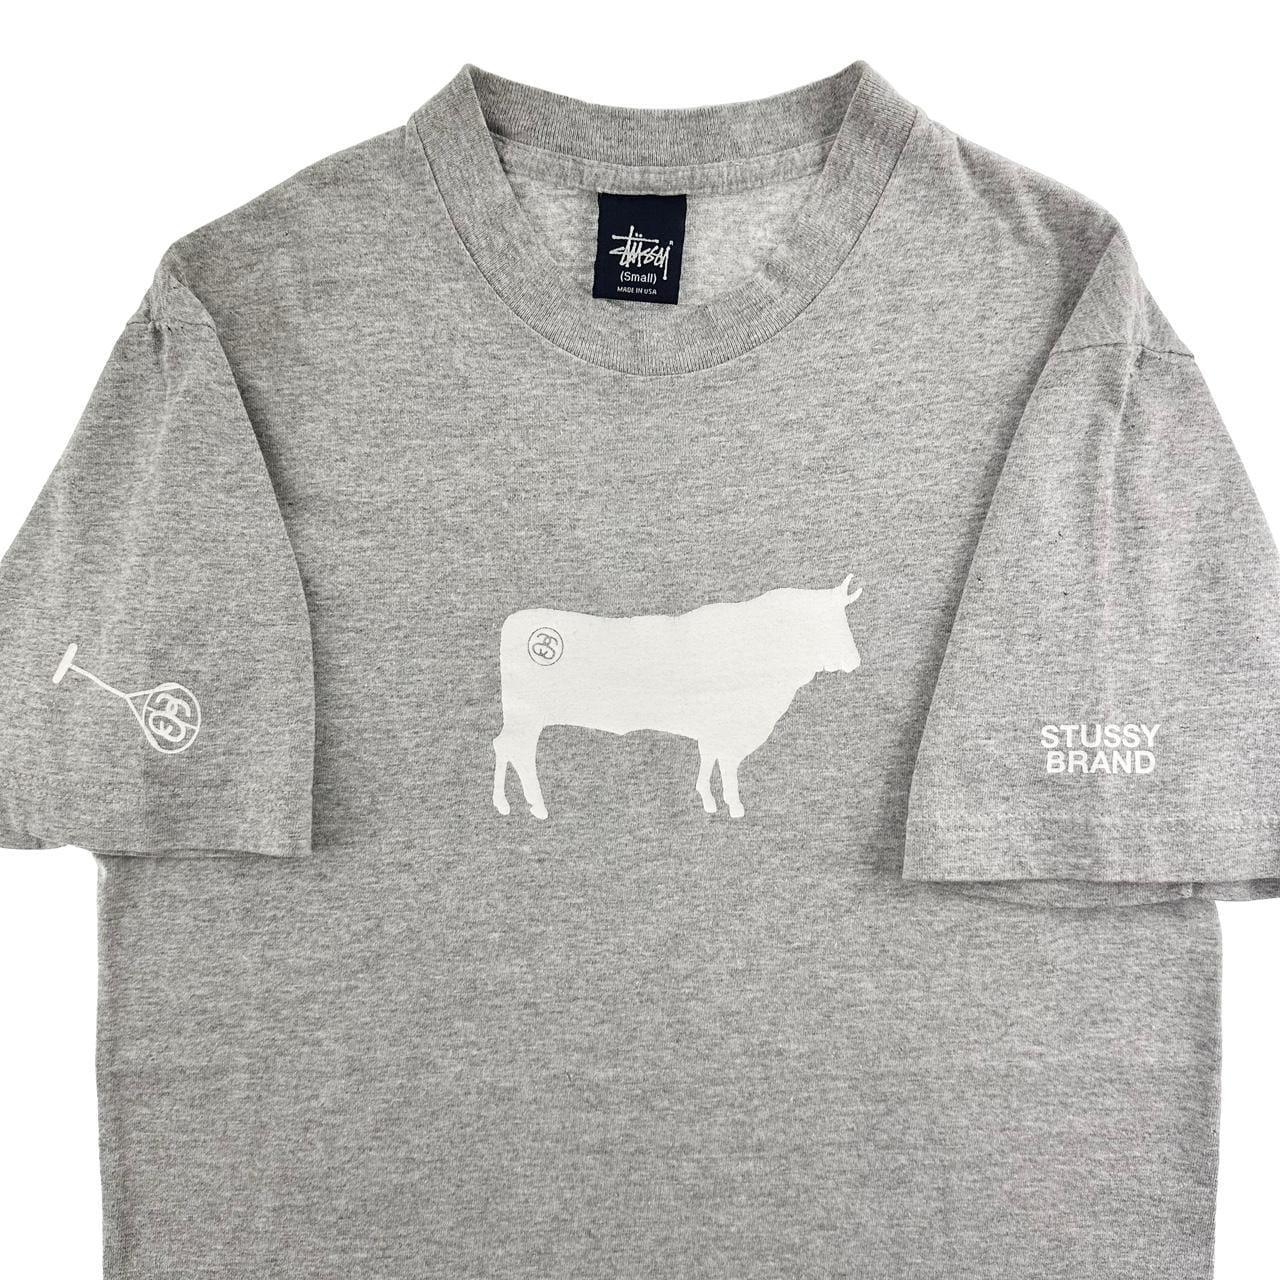 Vintage Stussy cow brand t shirt size S - Known Source